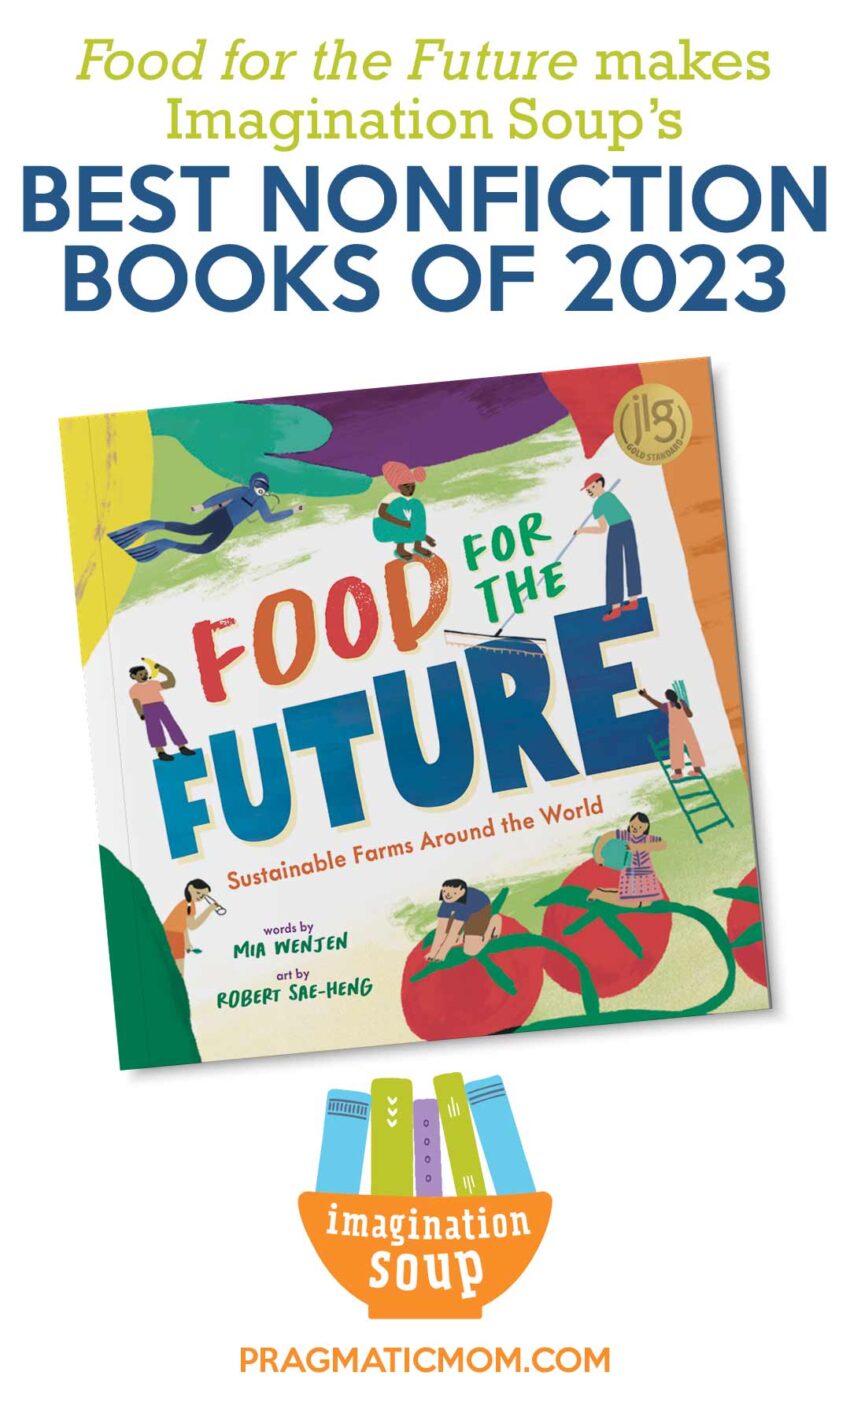 FOOD FOR THE FUTURE makes Imagination Soup's Best Nonfiction Books of 2023